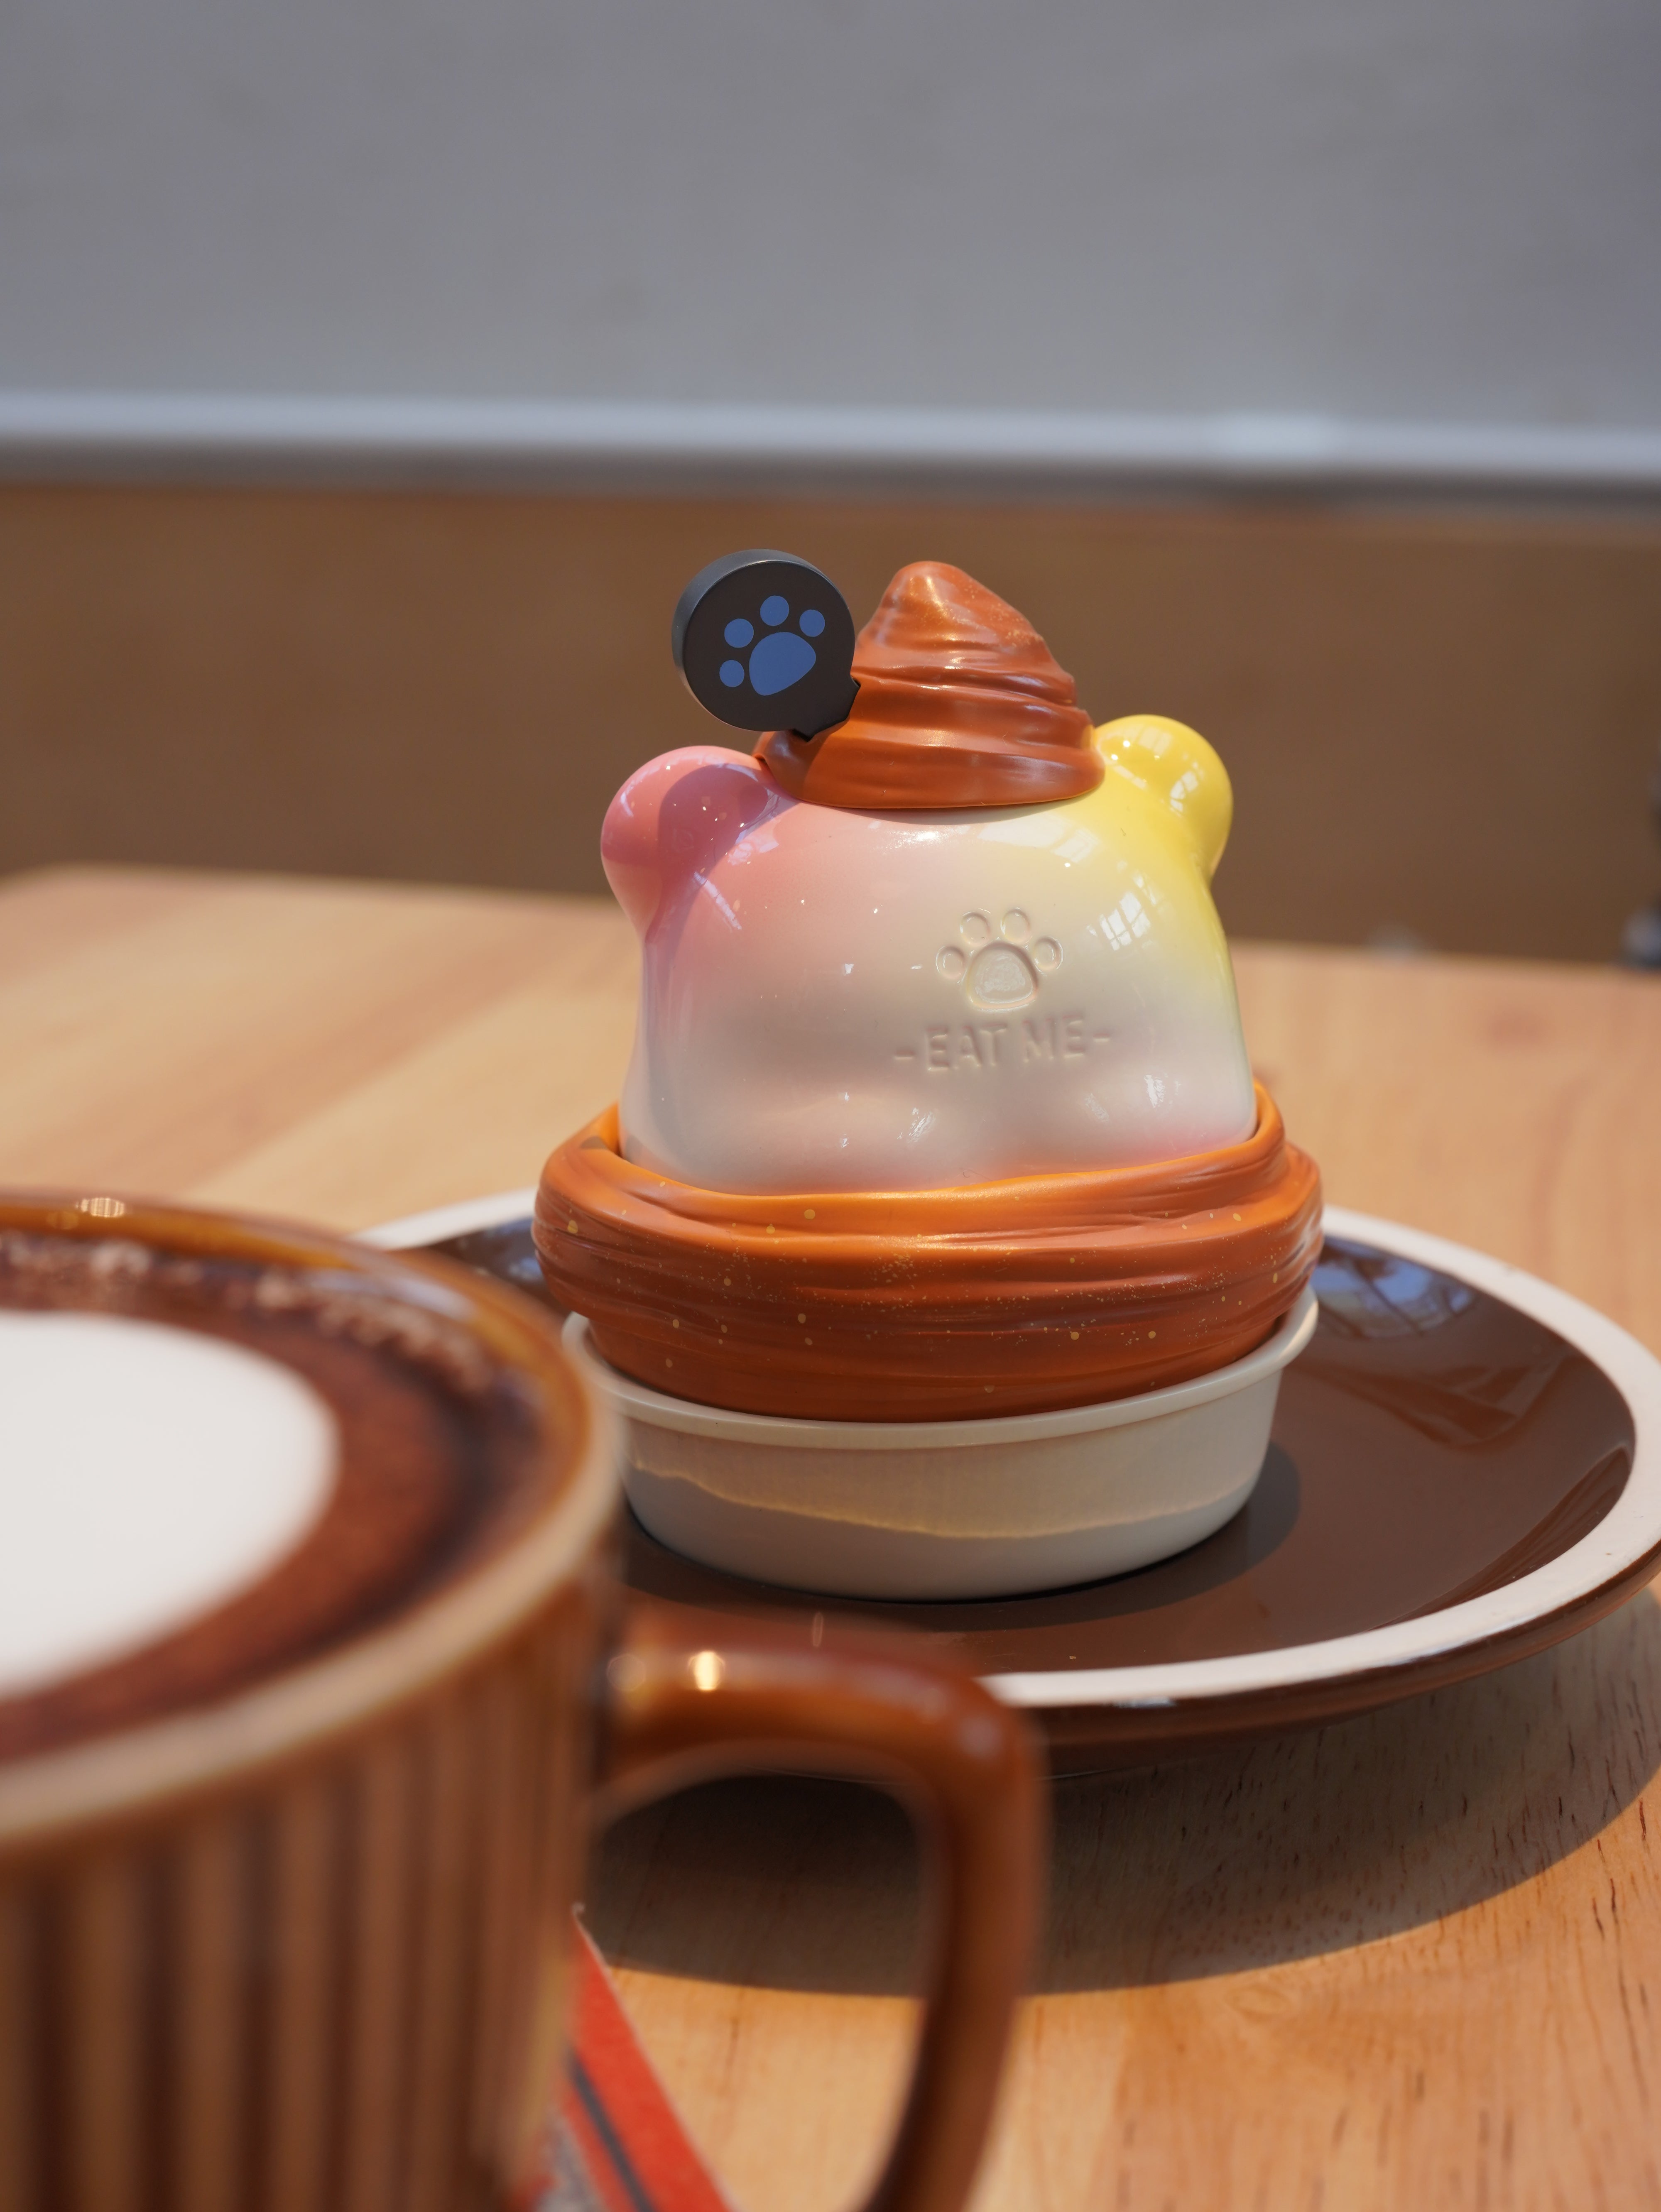 Croissant Han Han figurine on a plate with a cup and ceramic object, paw print on a hockey puck, close-ups of cup, toy, and handle.